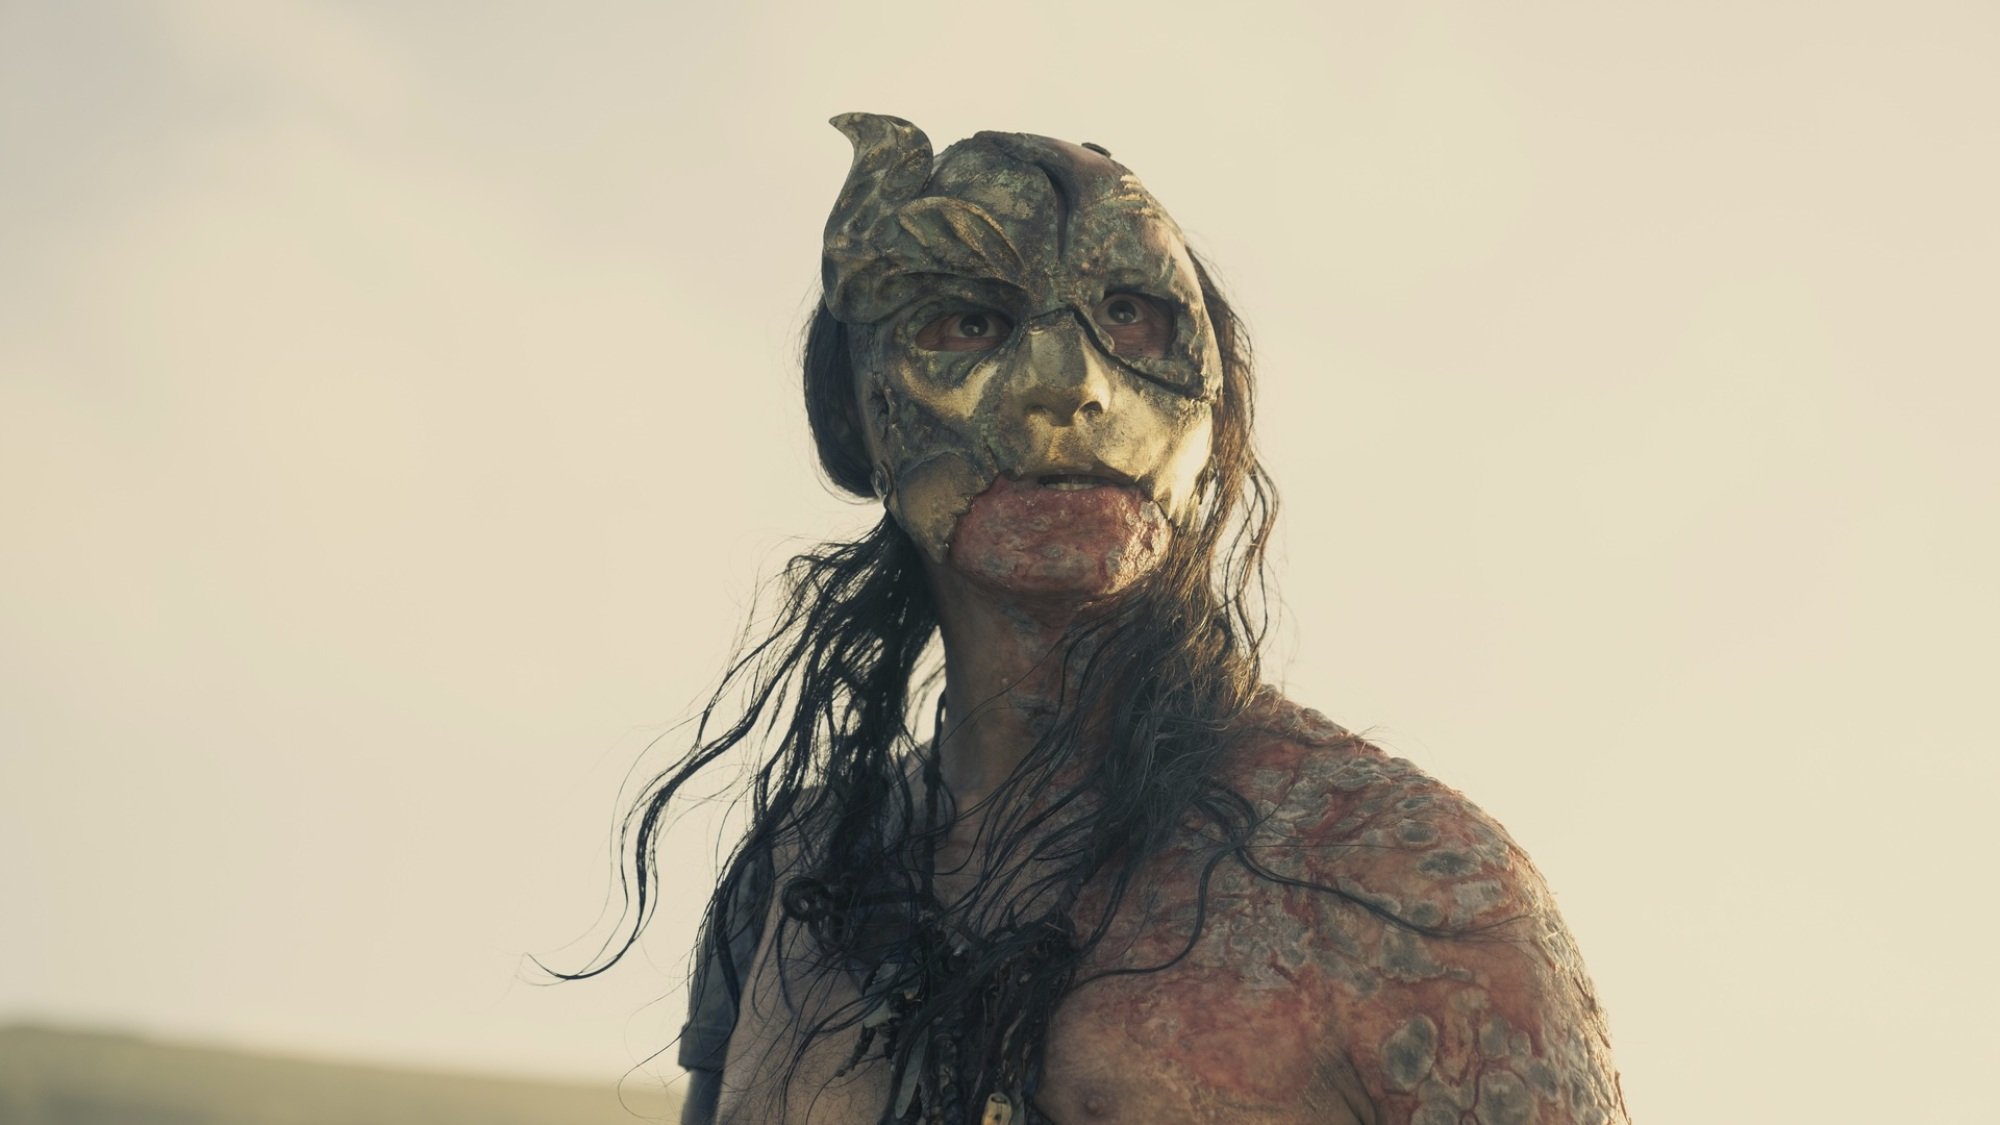 A badly sunburned man with long brown hair and a cracked golden mask.